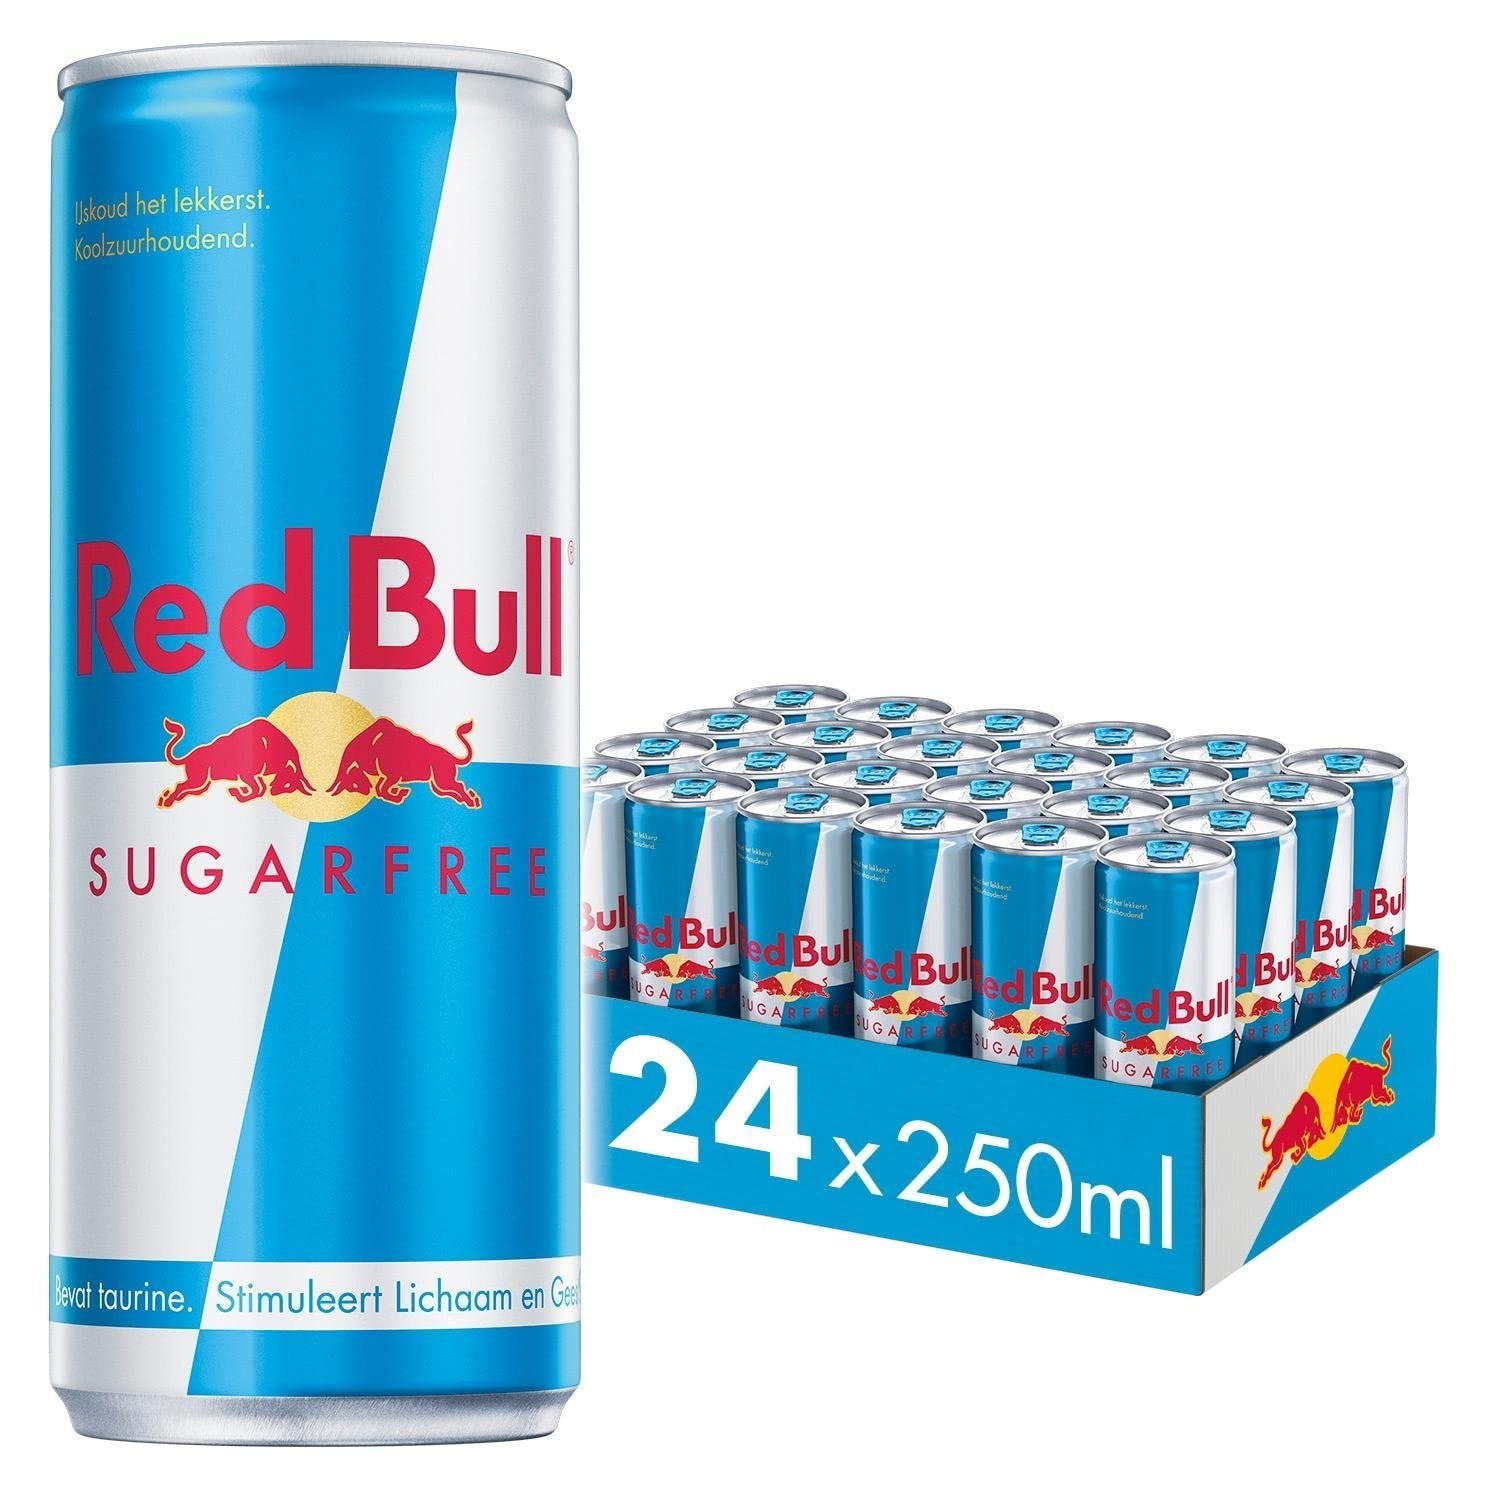 Red Bull Sugarfree Drink - 250ml - Case of 24